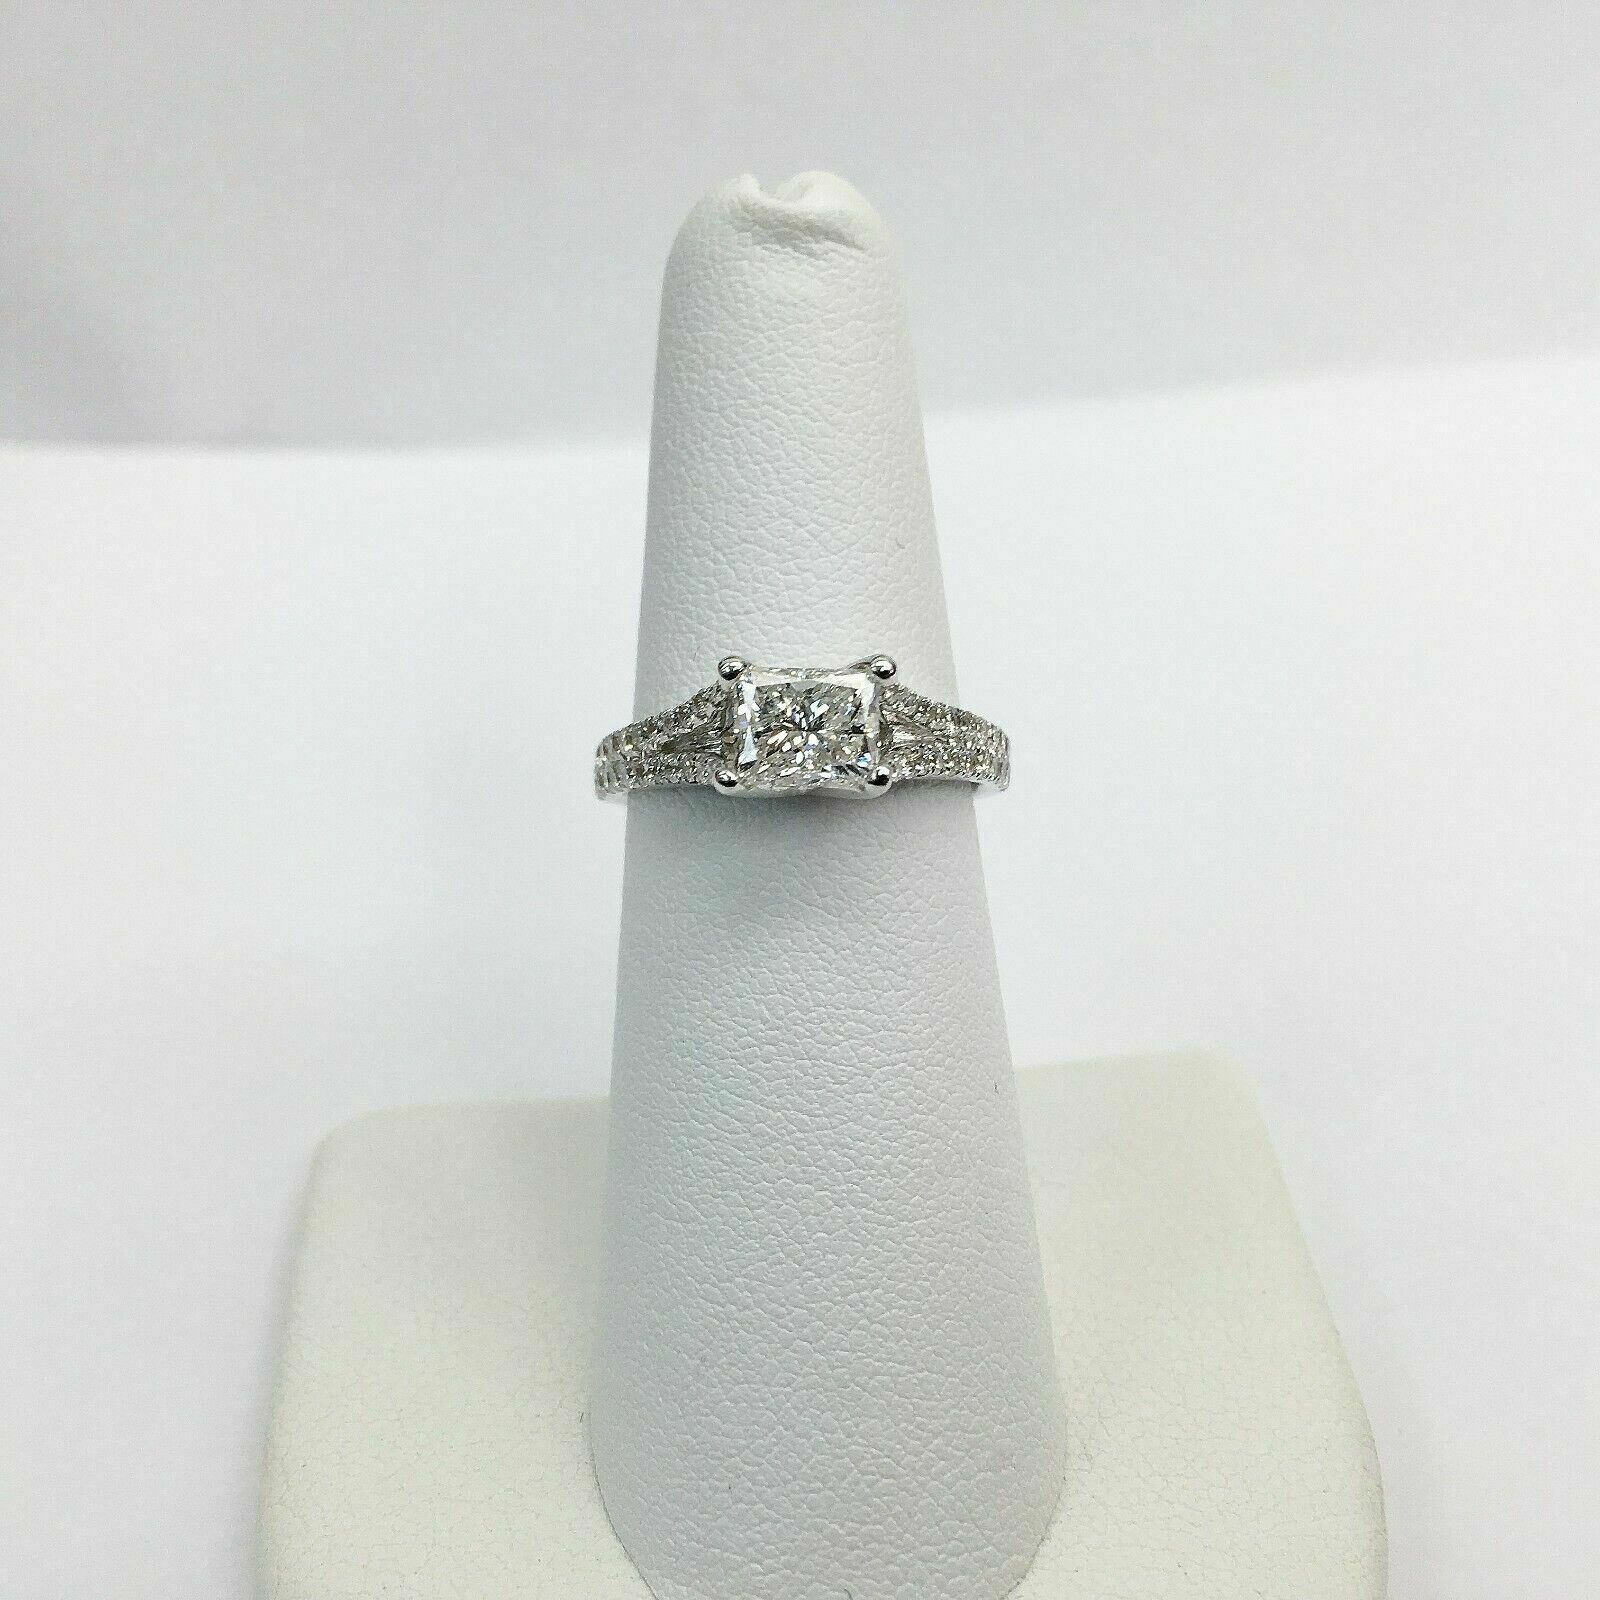 1.87 Carats t.w. Diamond Wedding/Anniversary Ring Center 1.07 AGS G SI2 18K Gold